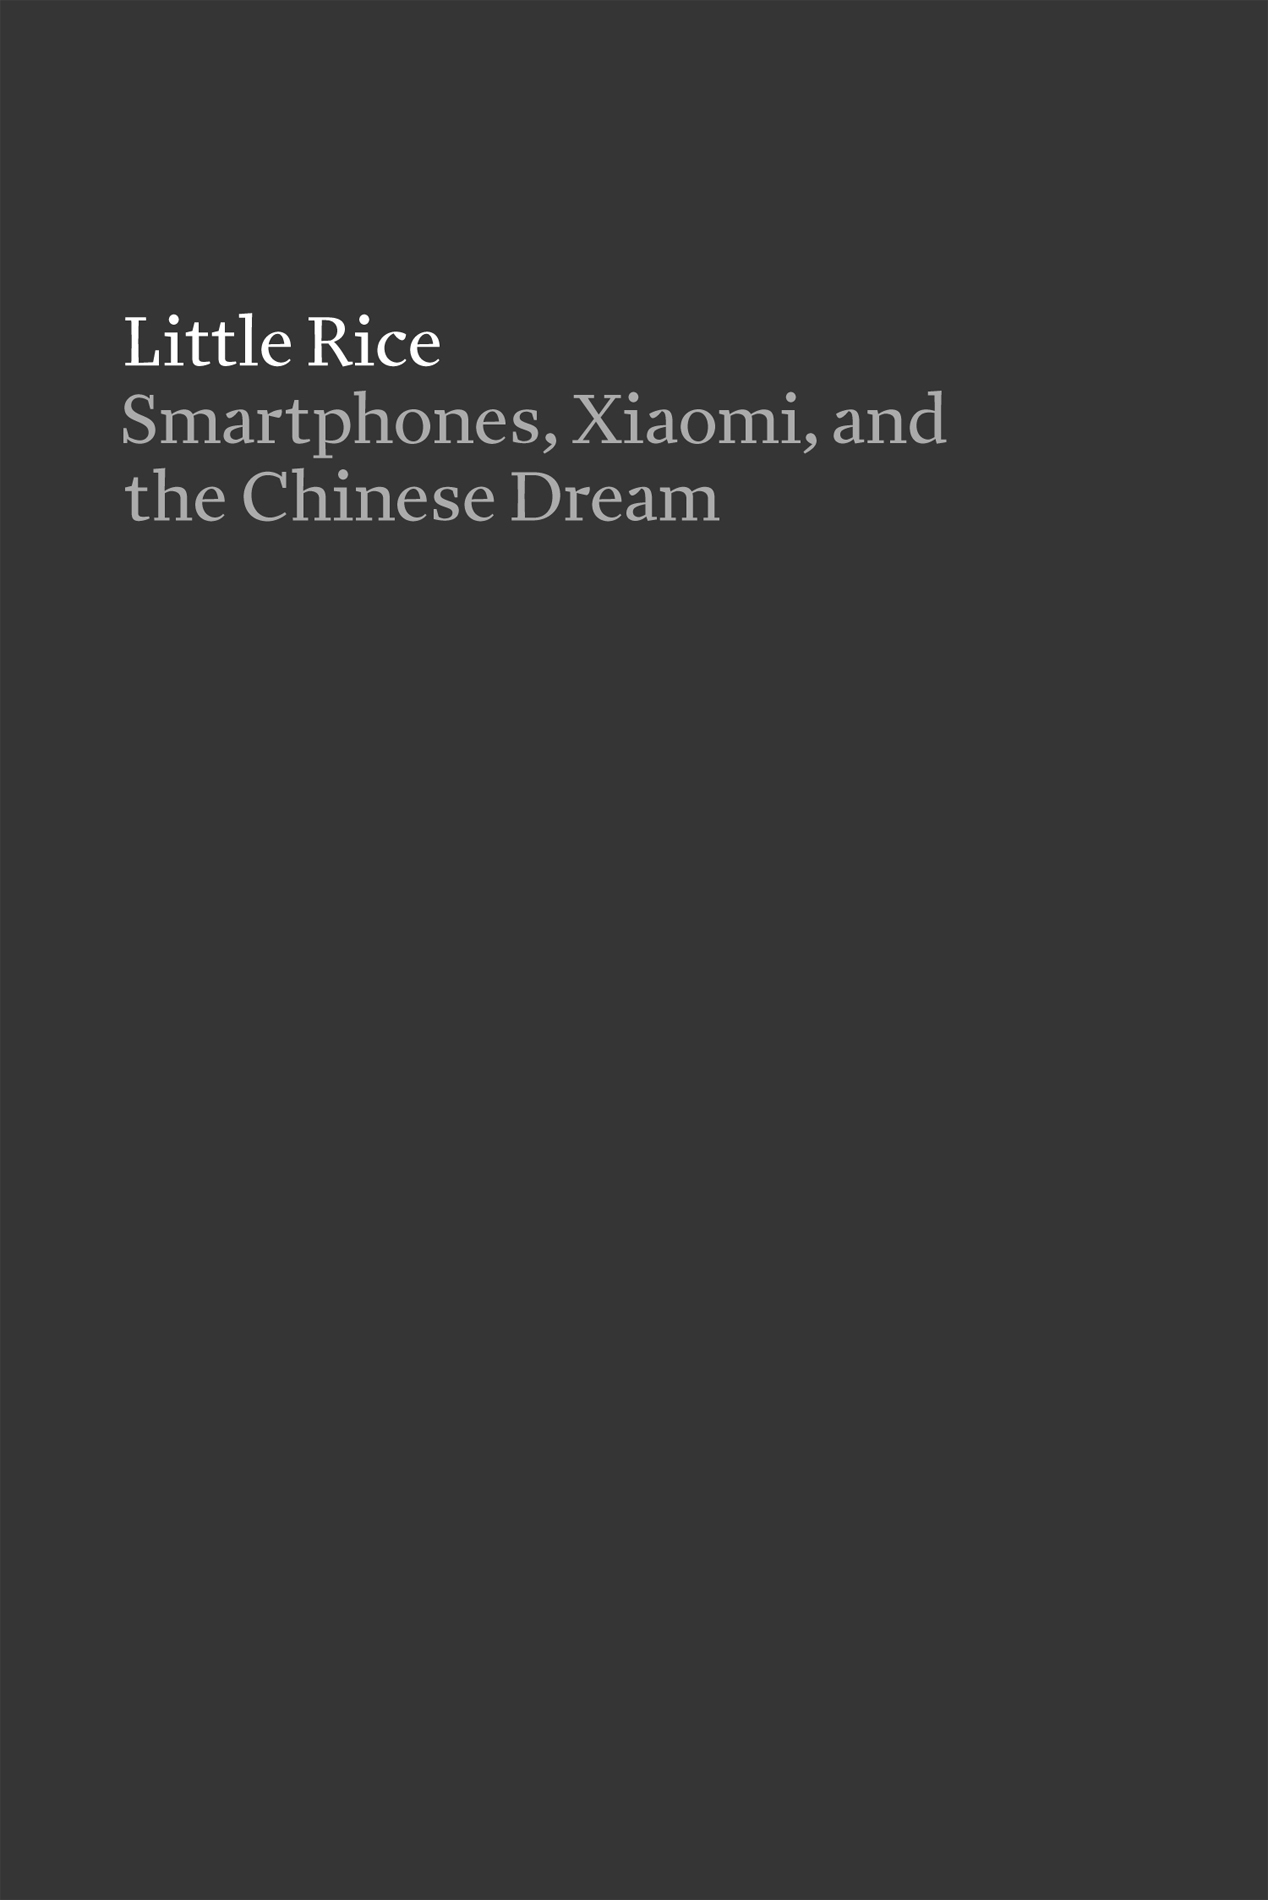 Little Rice Smartphones Xiaomi and the Chinese Dream Copyright 2015 by - photo 1